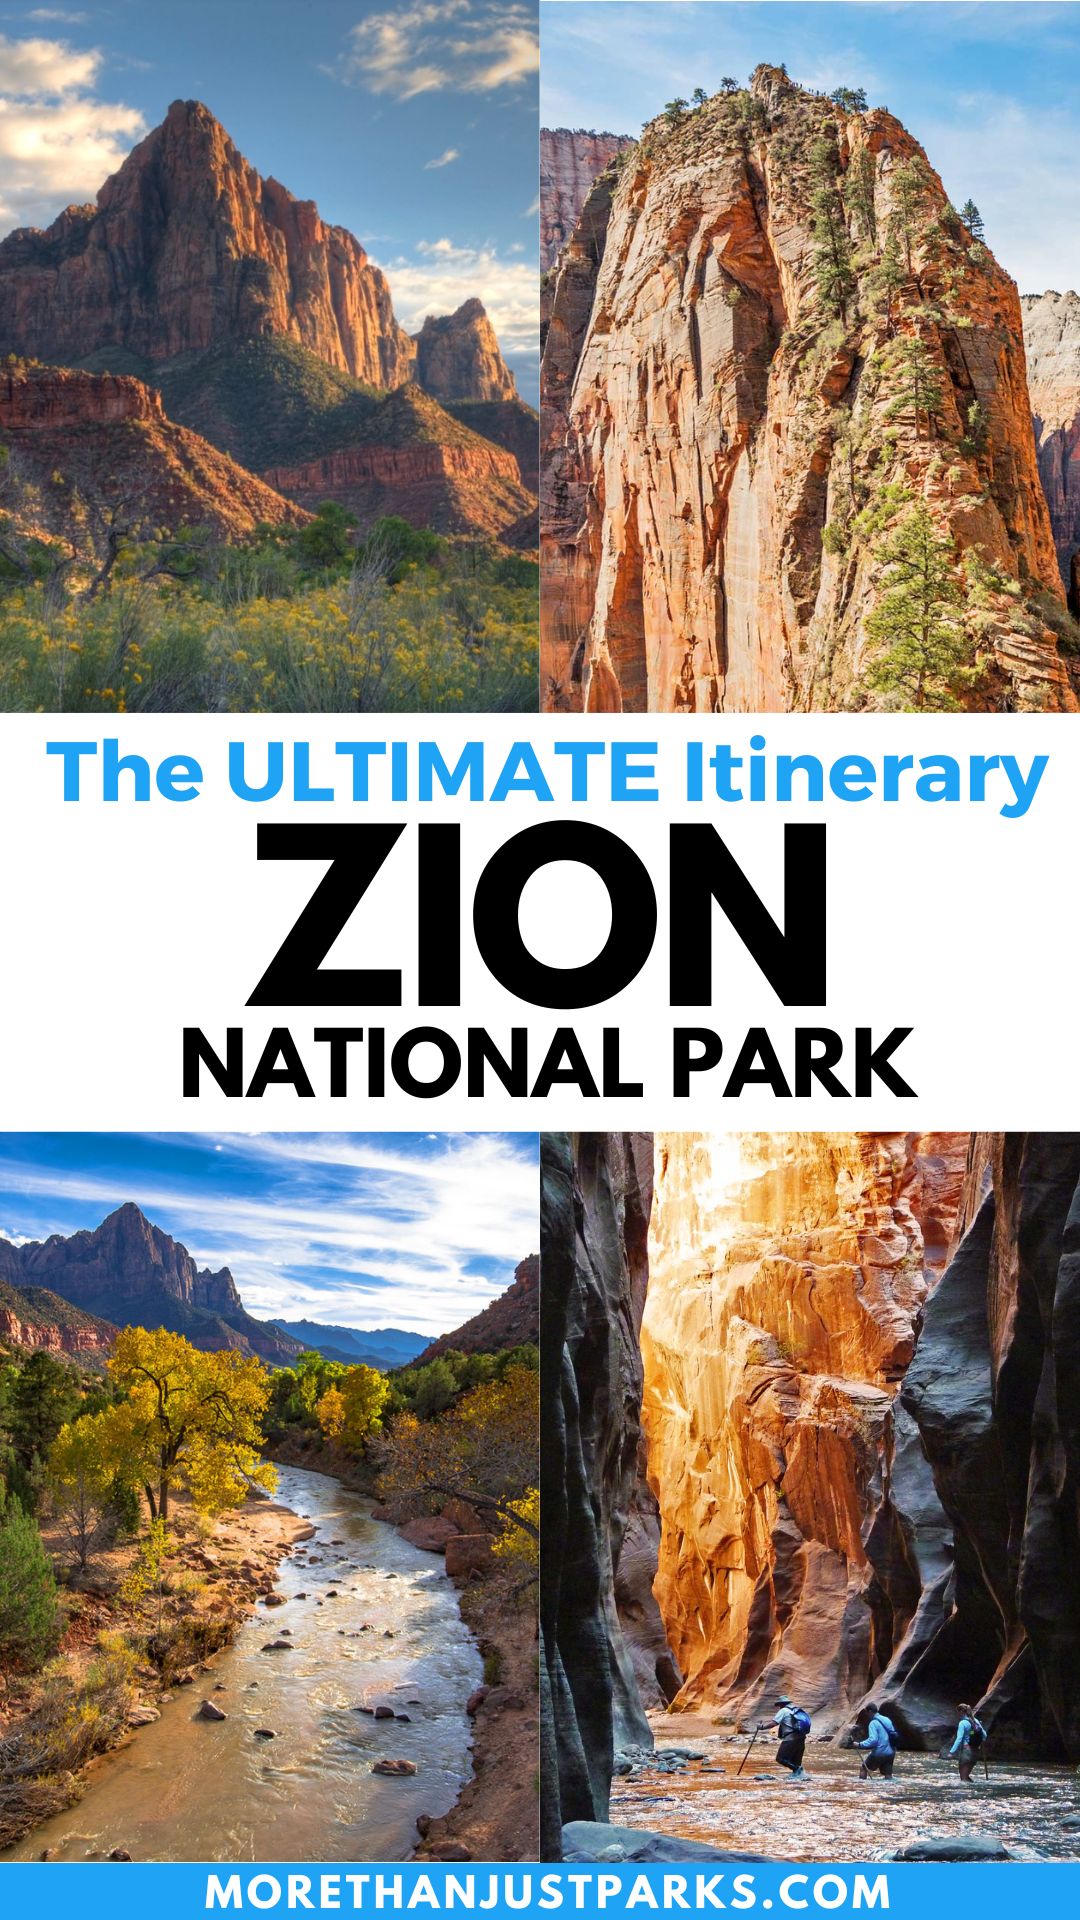 Graphic reads "The Ultimate Itinerary: Zion National Park."